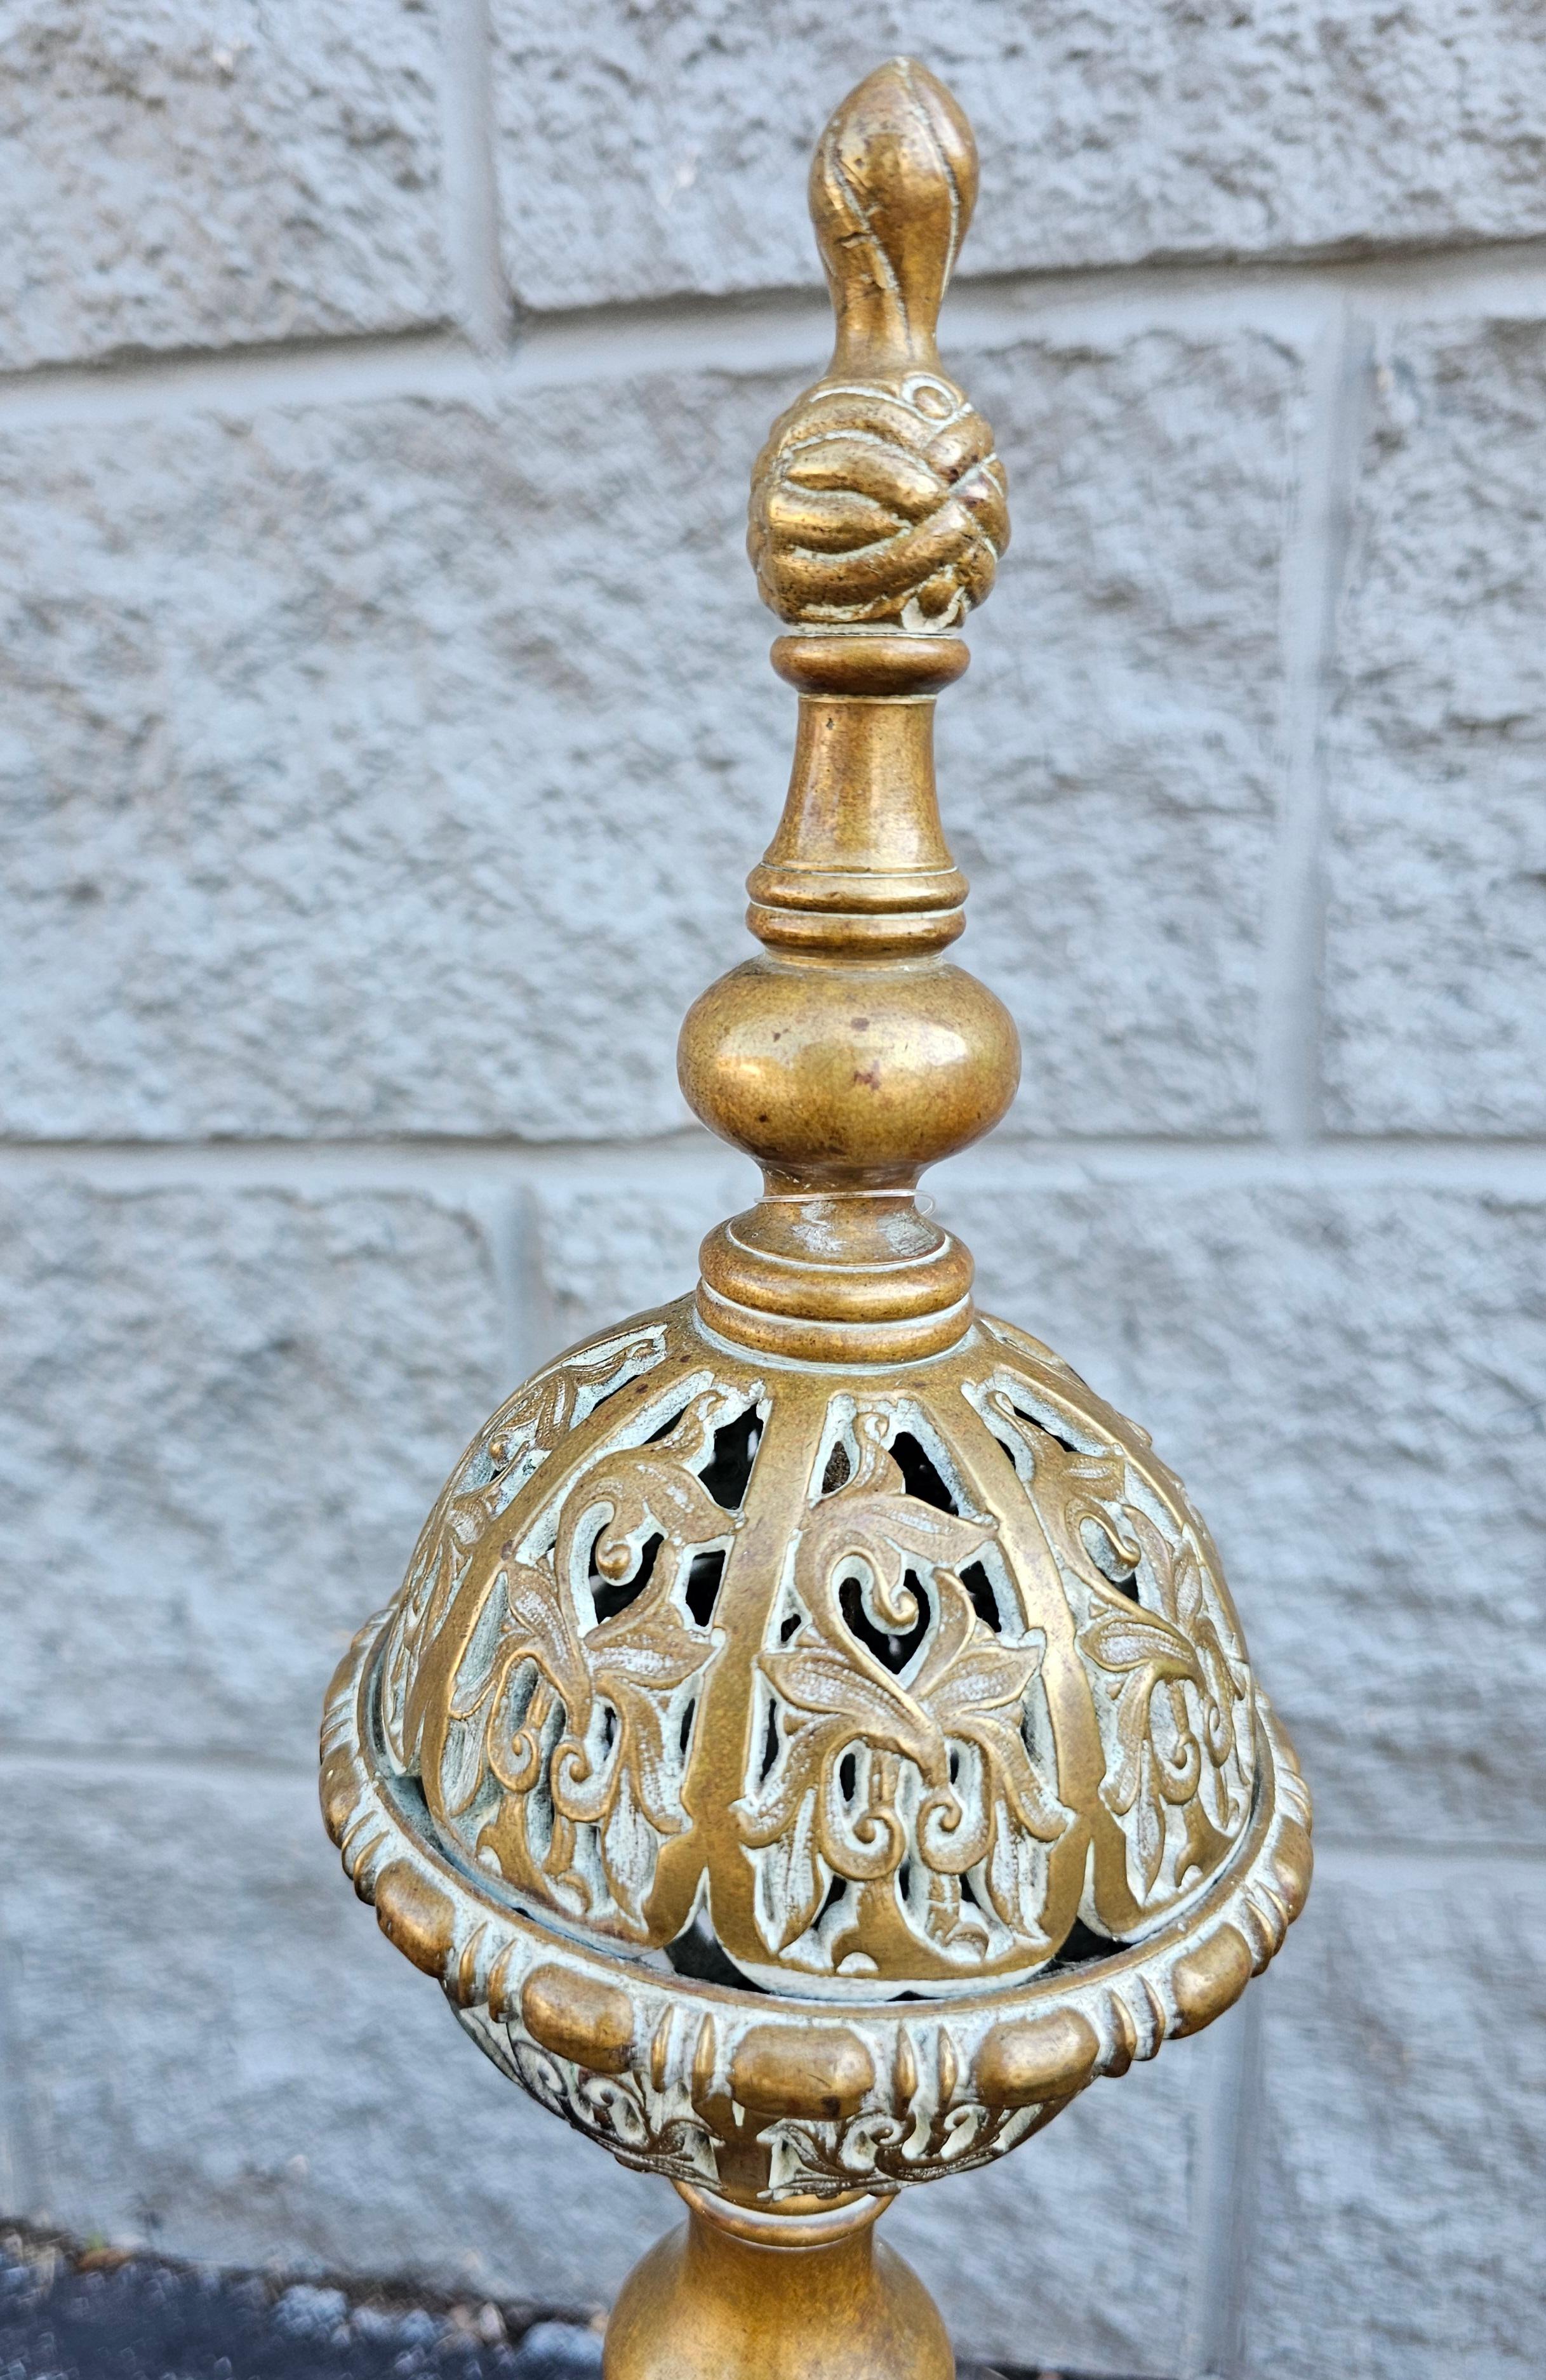 19th Century Dutch Rococo Style Brass Andironsns  In Good Condition For Sale In Germantown, MD